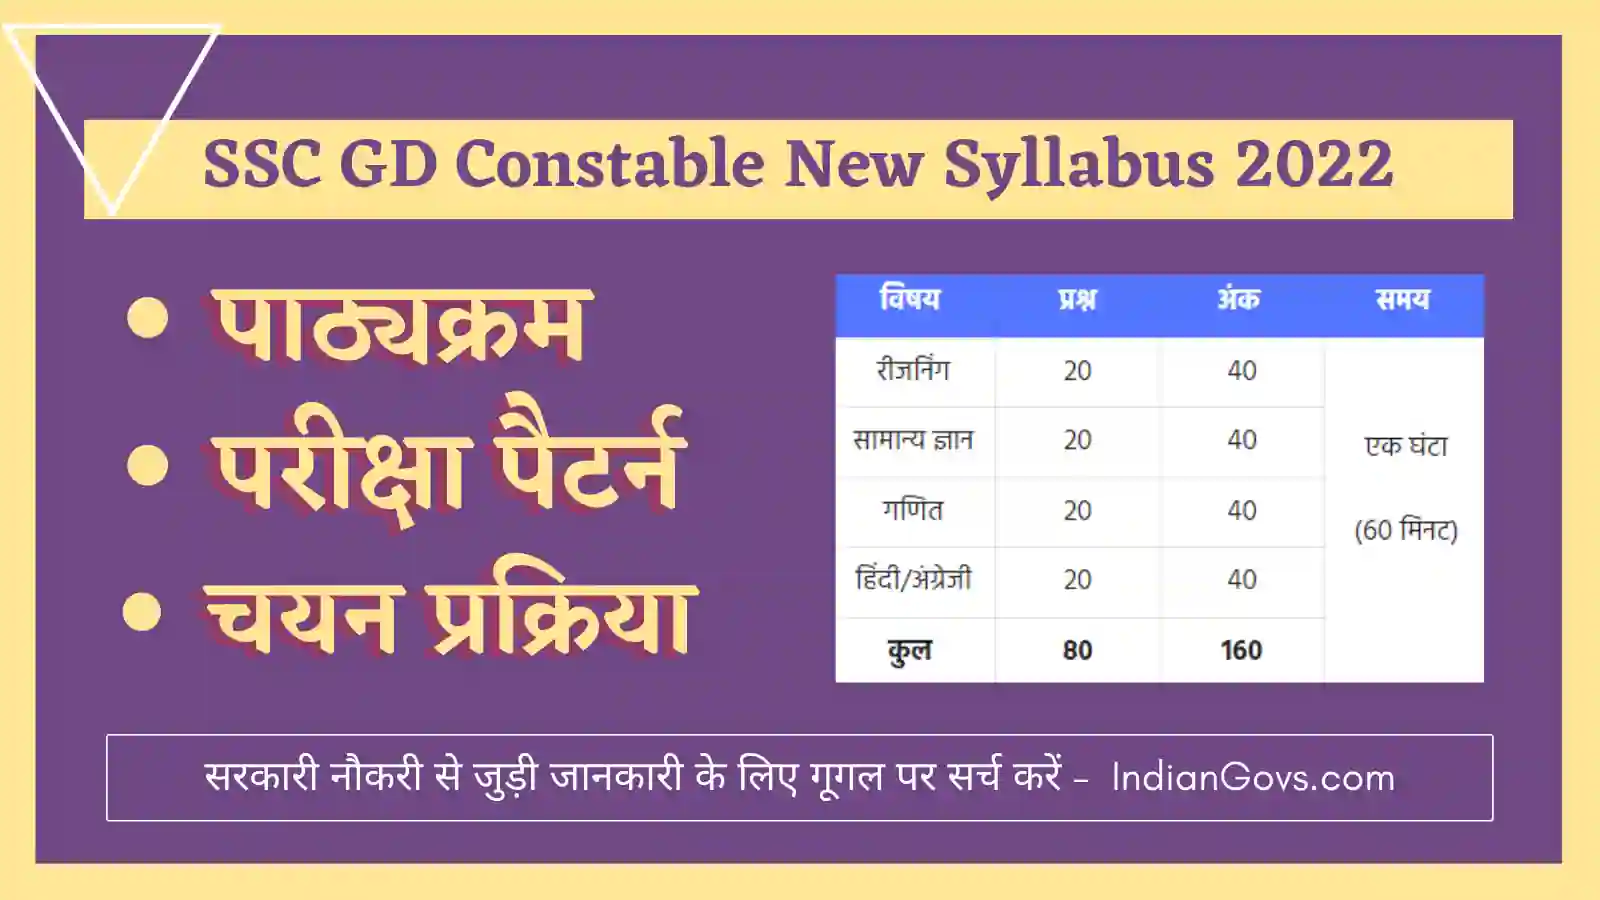 SSC GD Constable New Syllabus 2022 in Hindi